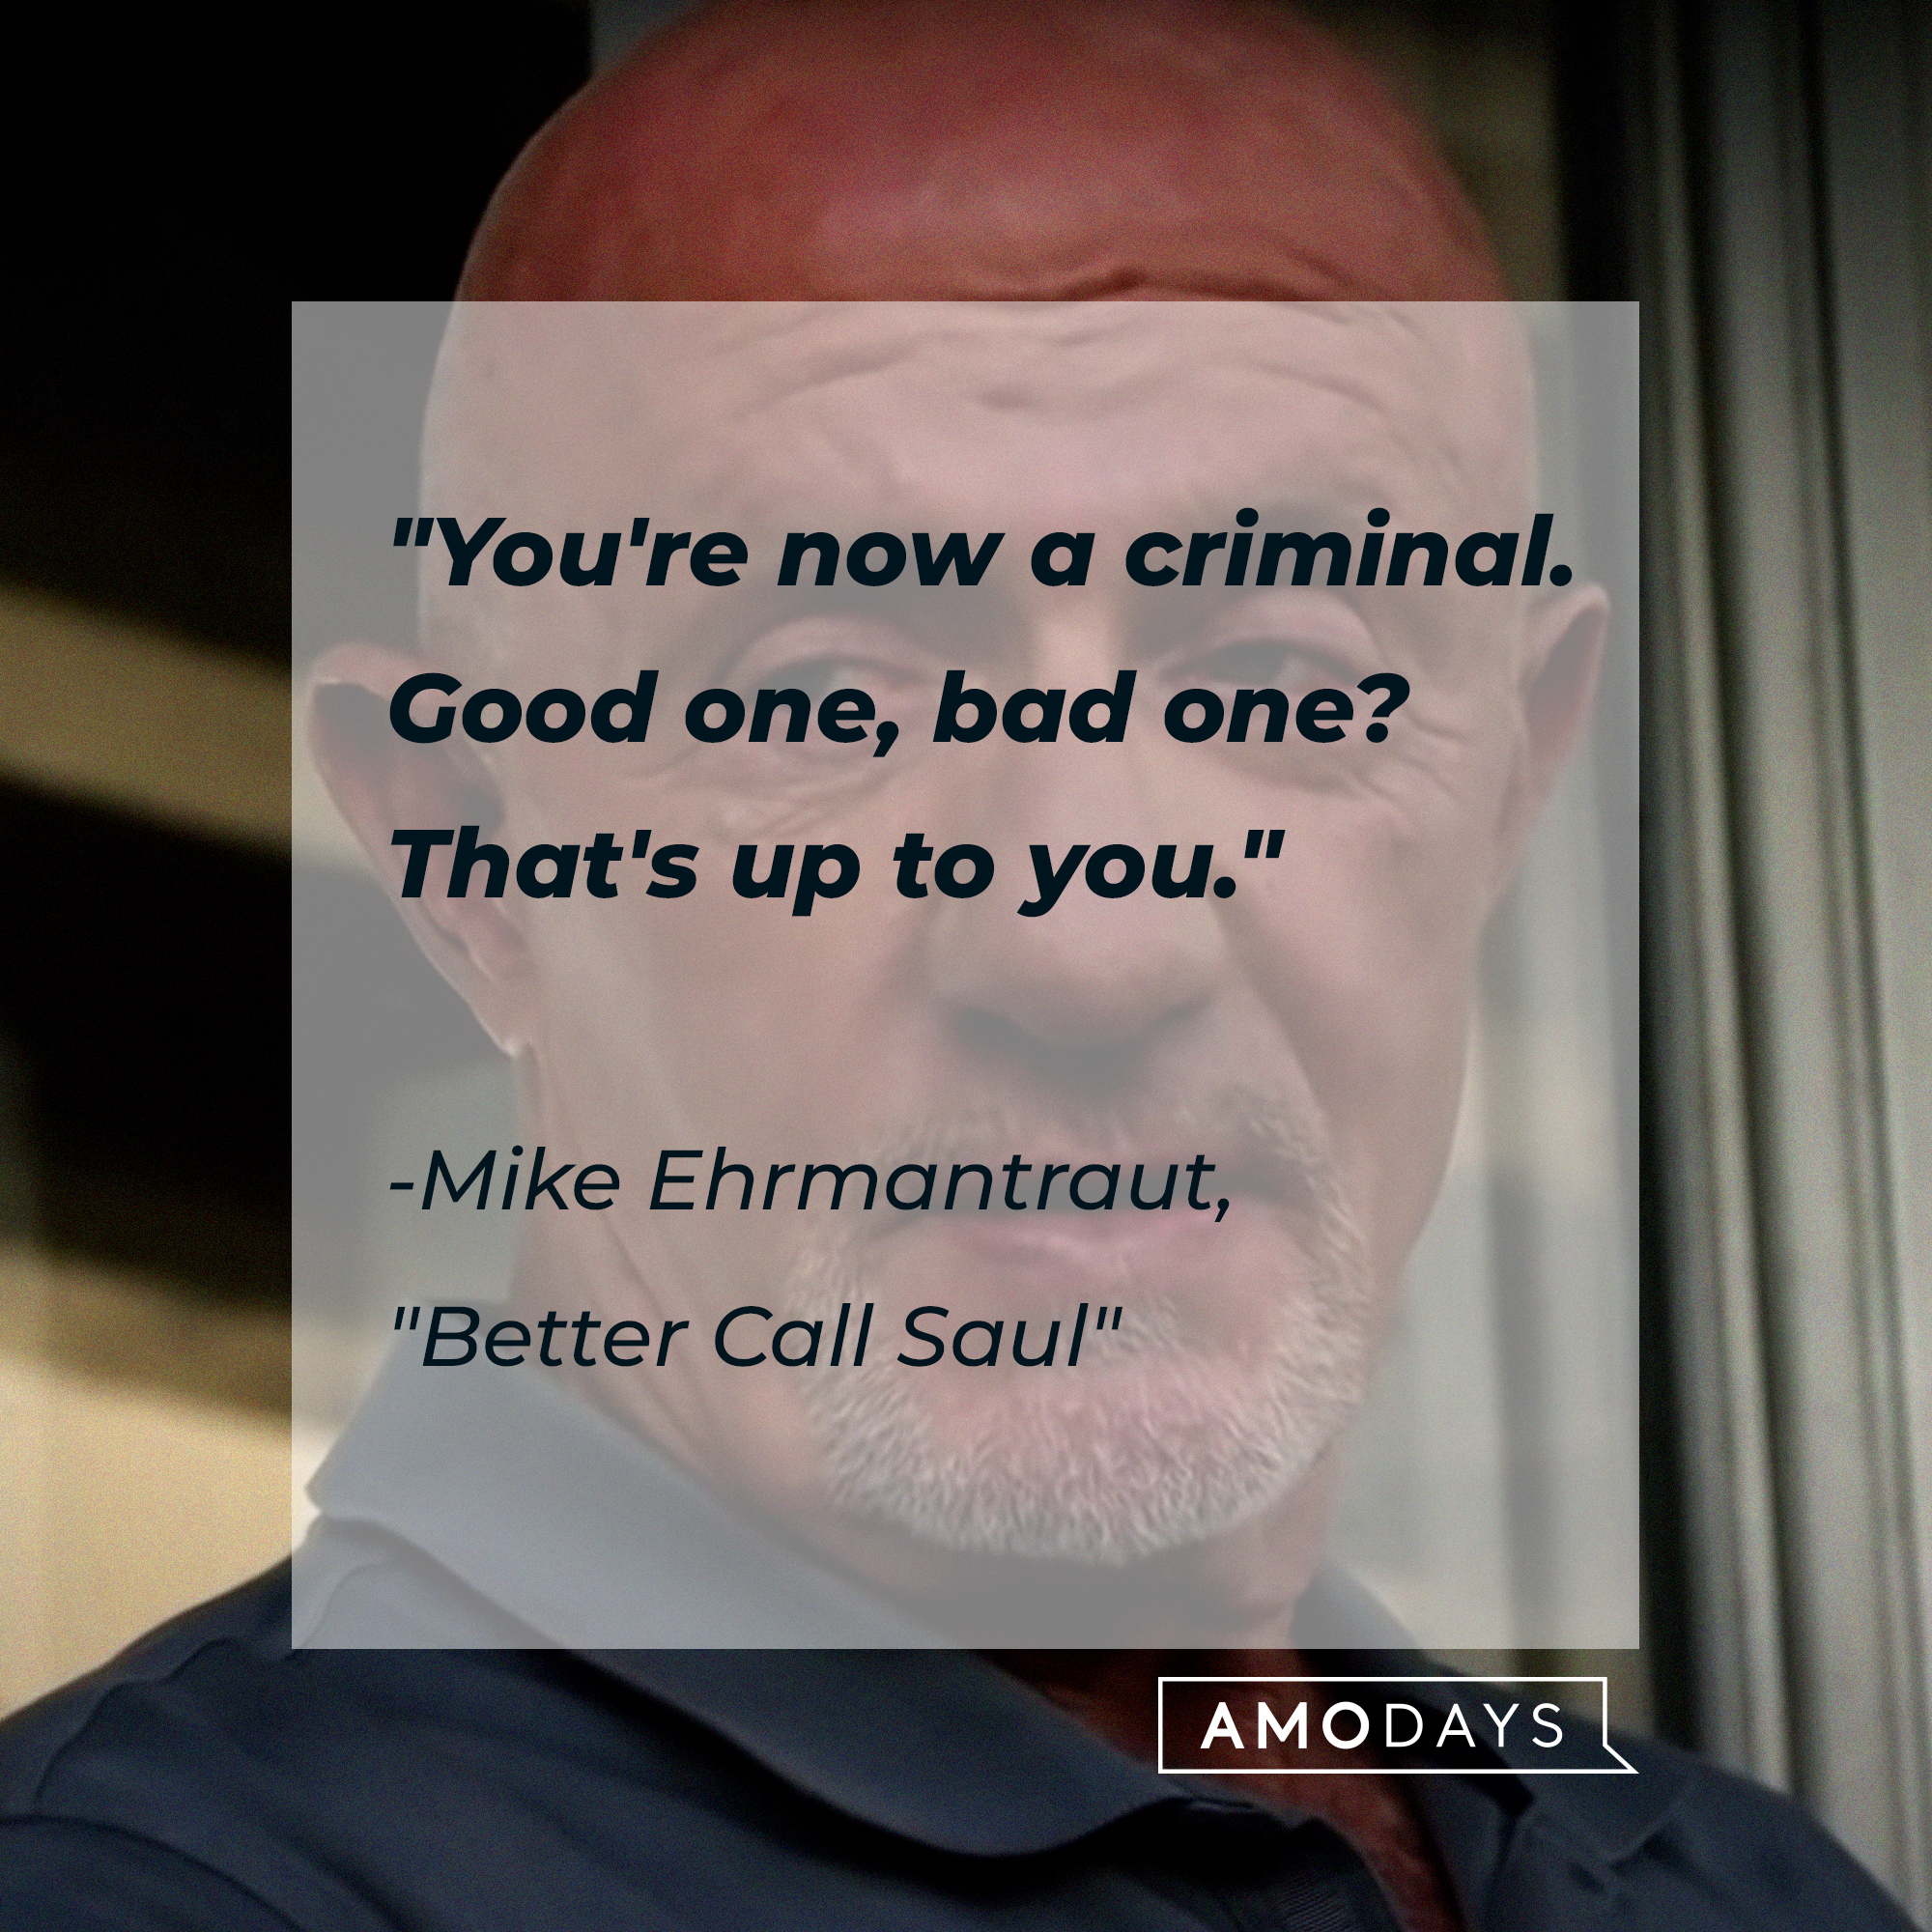 Mike Ehrmantraut with his quote, "You're now a criminal. Good one, bad one? That's up to you." | Source: youtube.com/breakingbad